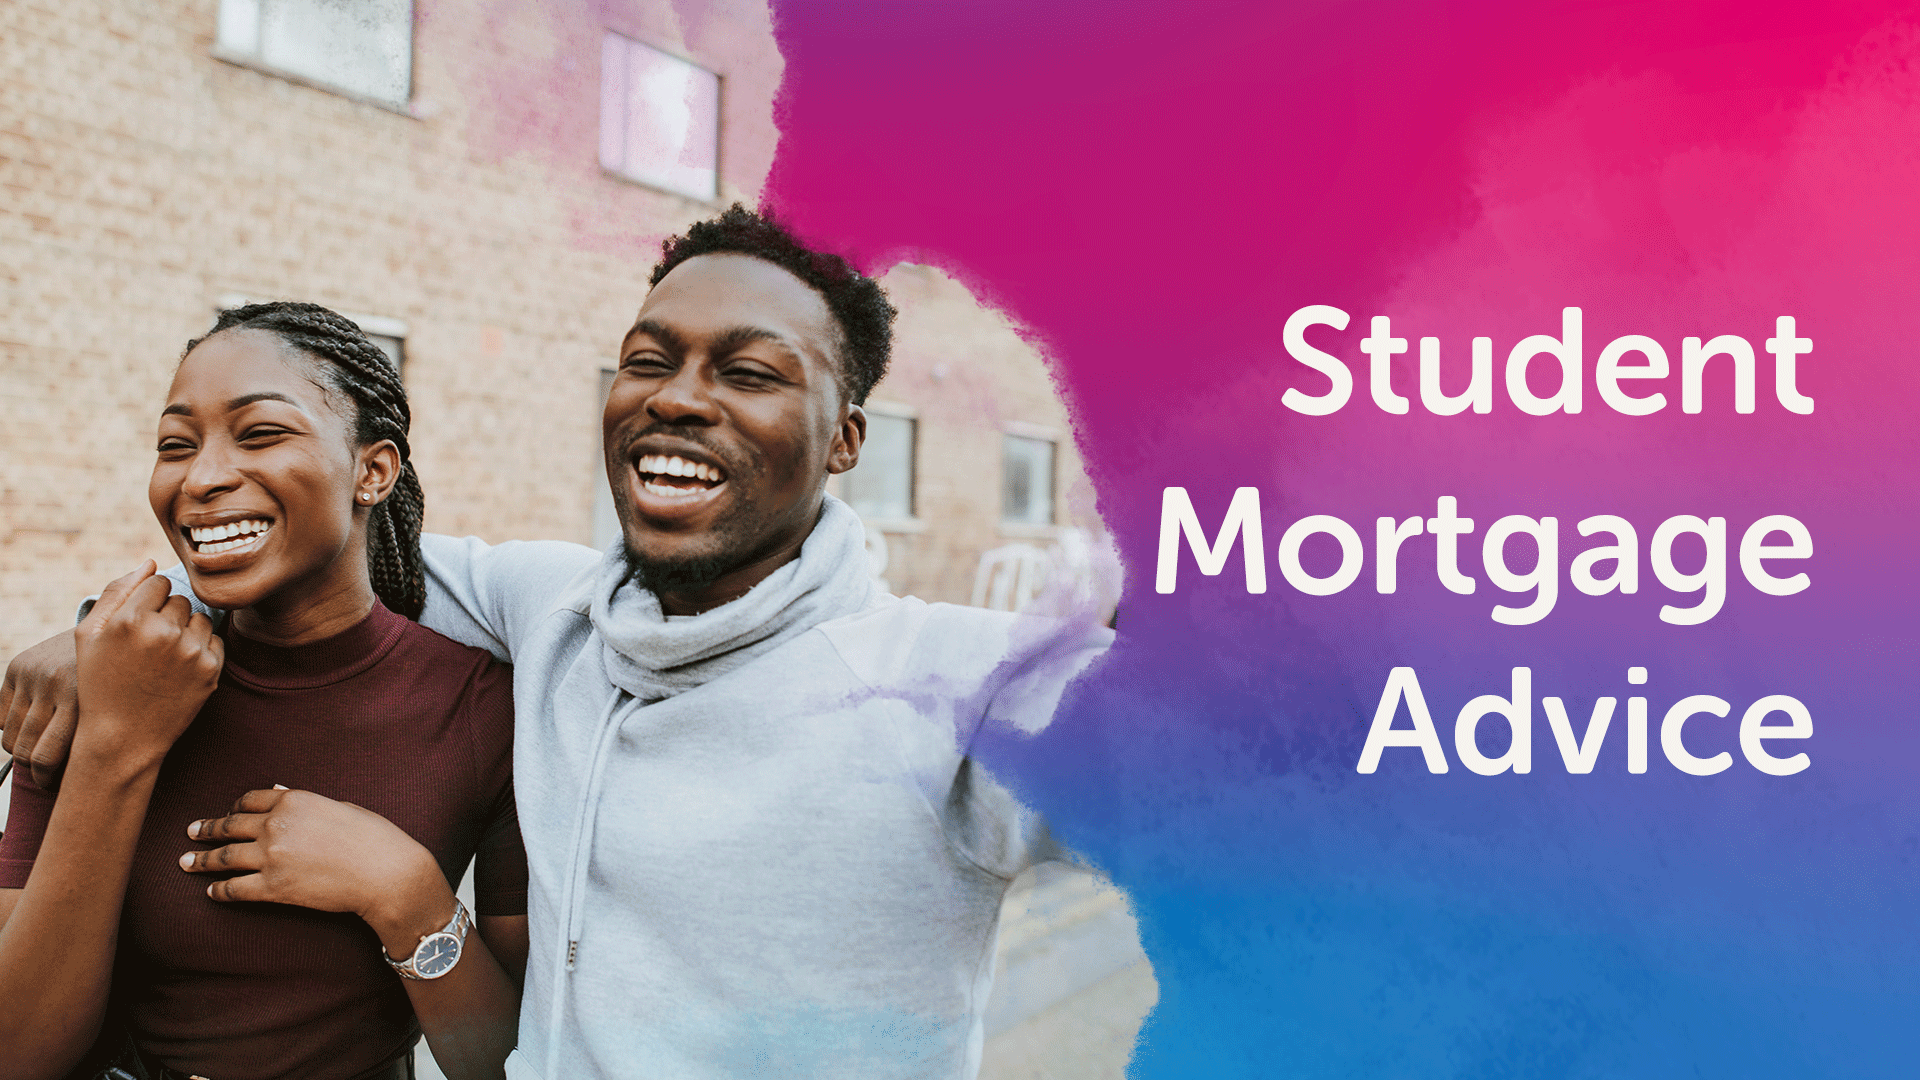 Can a Student Get a Mortgage in Birmingham?